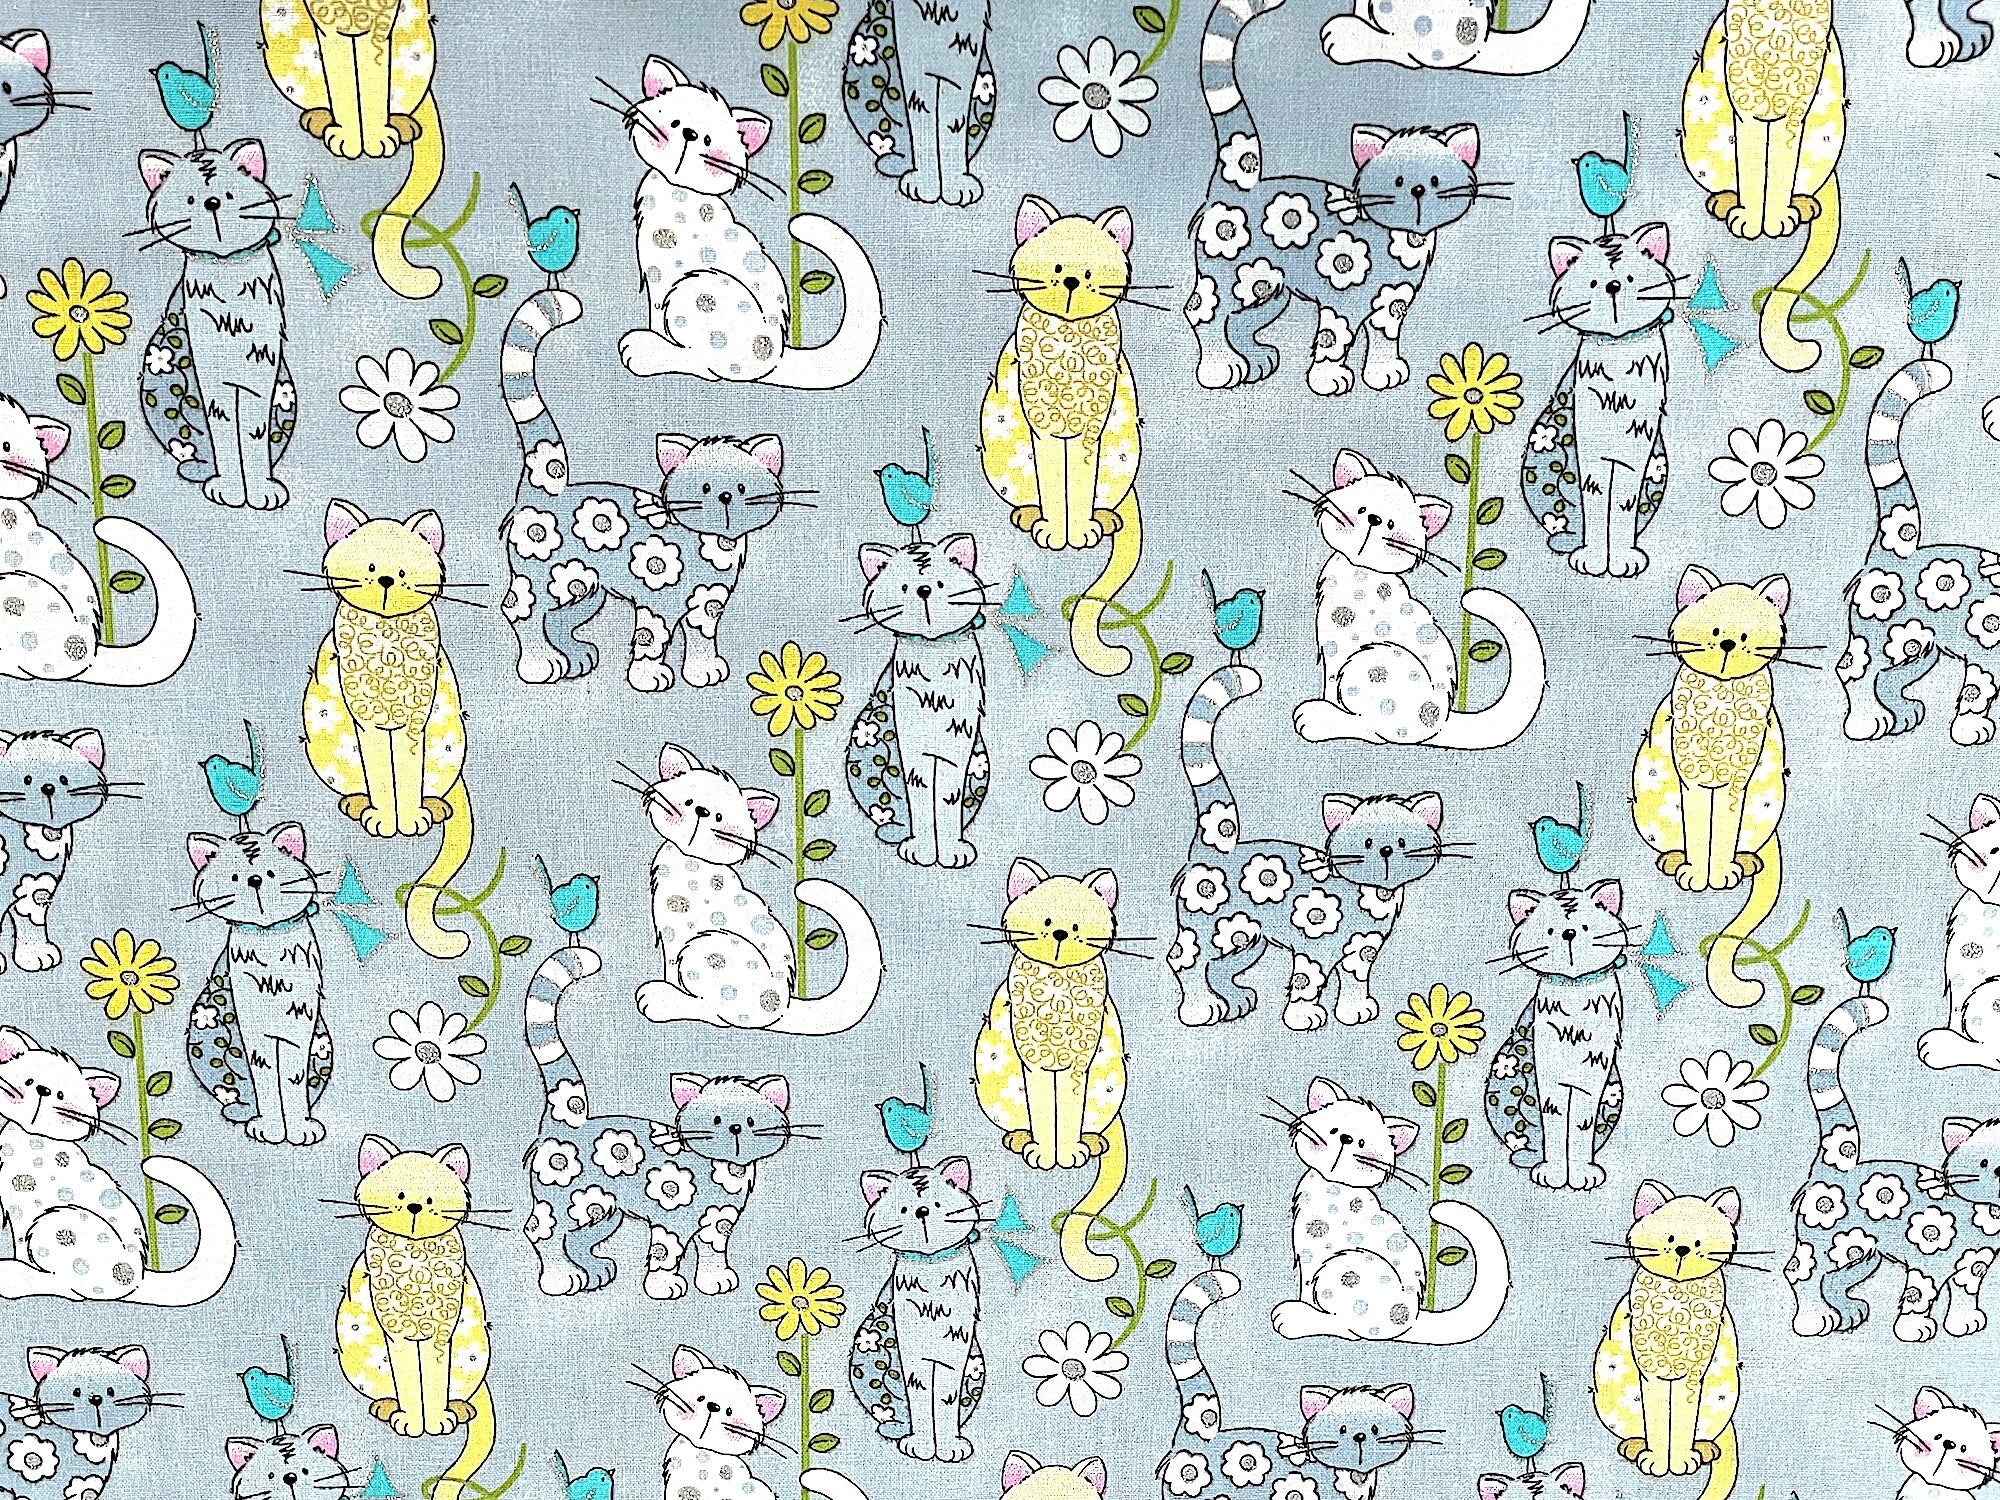 Grey, white and yellow kitties cover this cotton fabric. The kitties also have a few glitter dots on them. There are also yellow and white flowers and blue birds on this fabric.